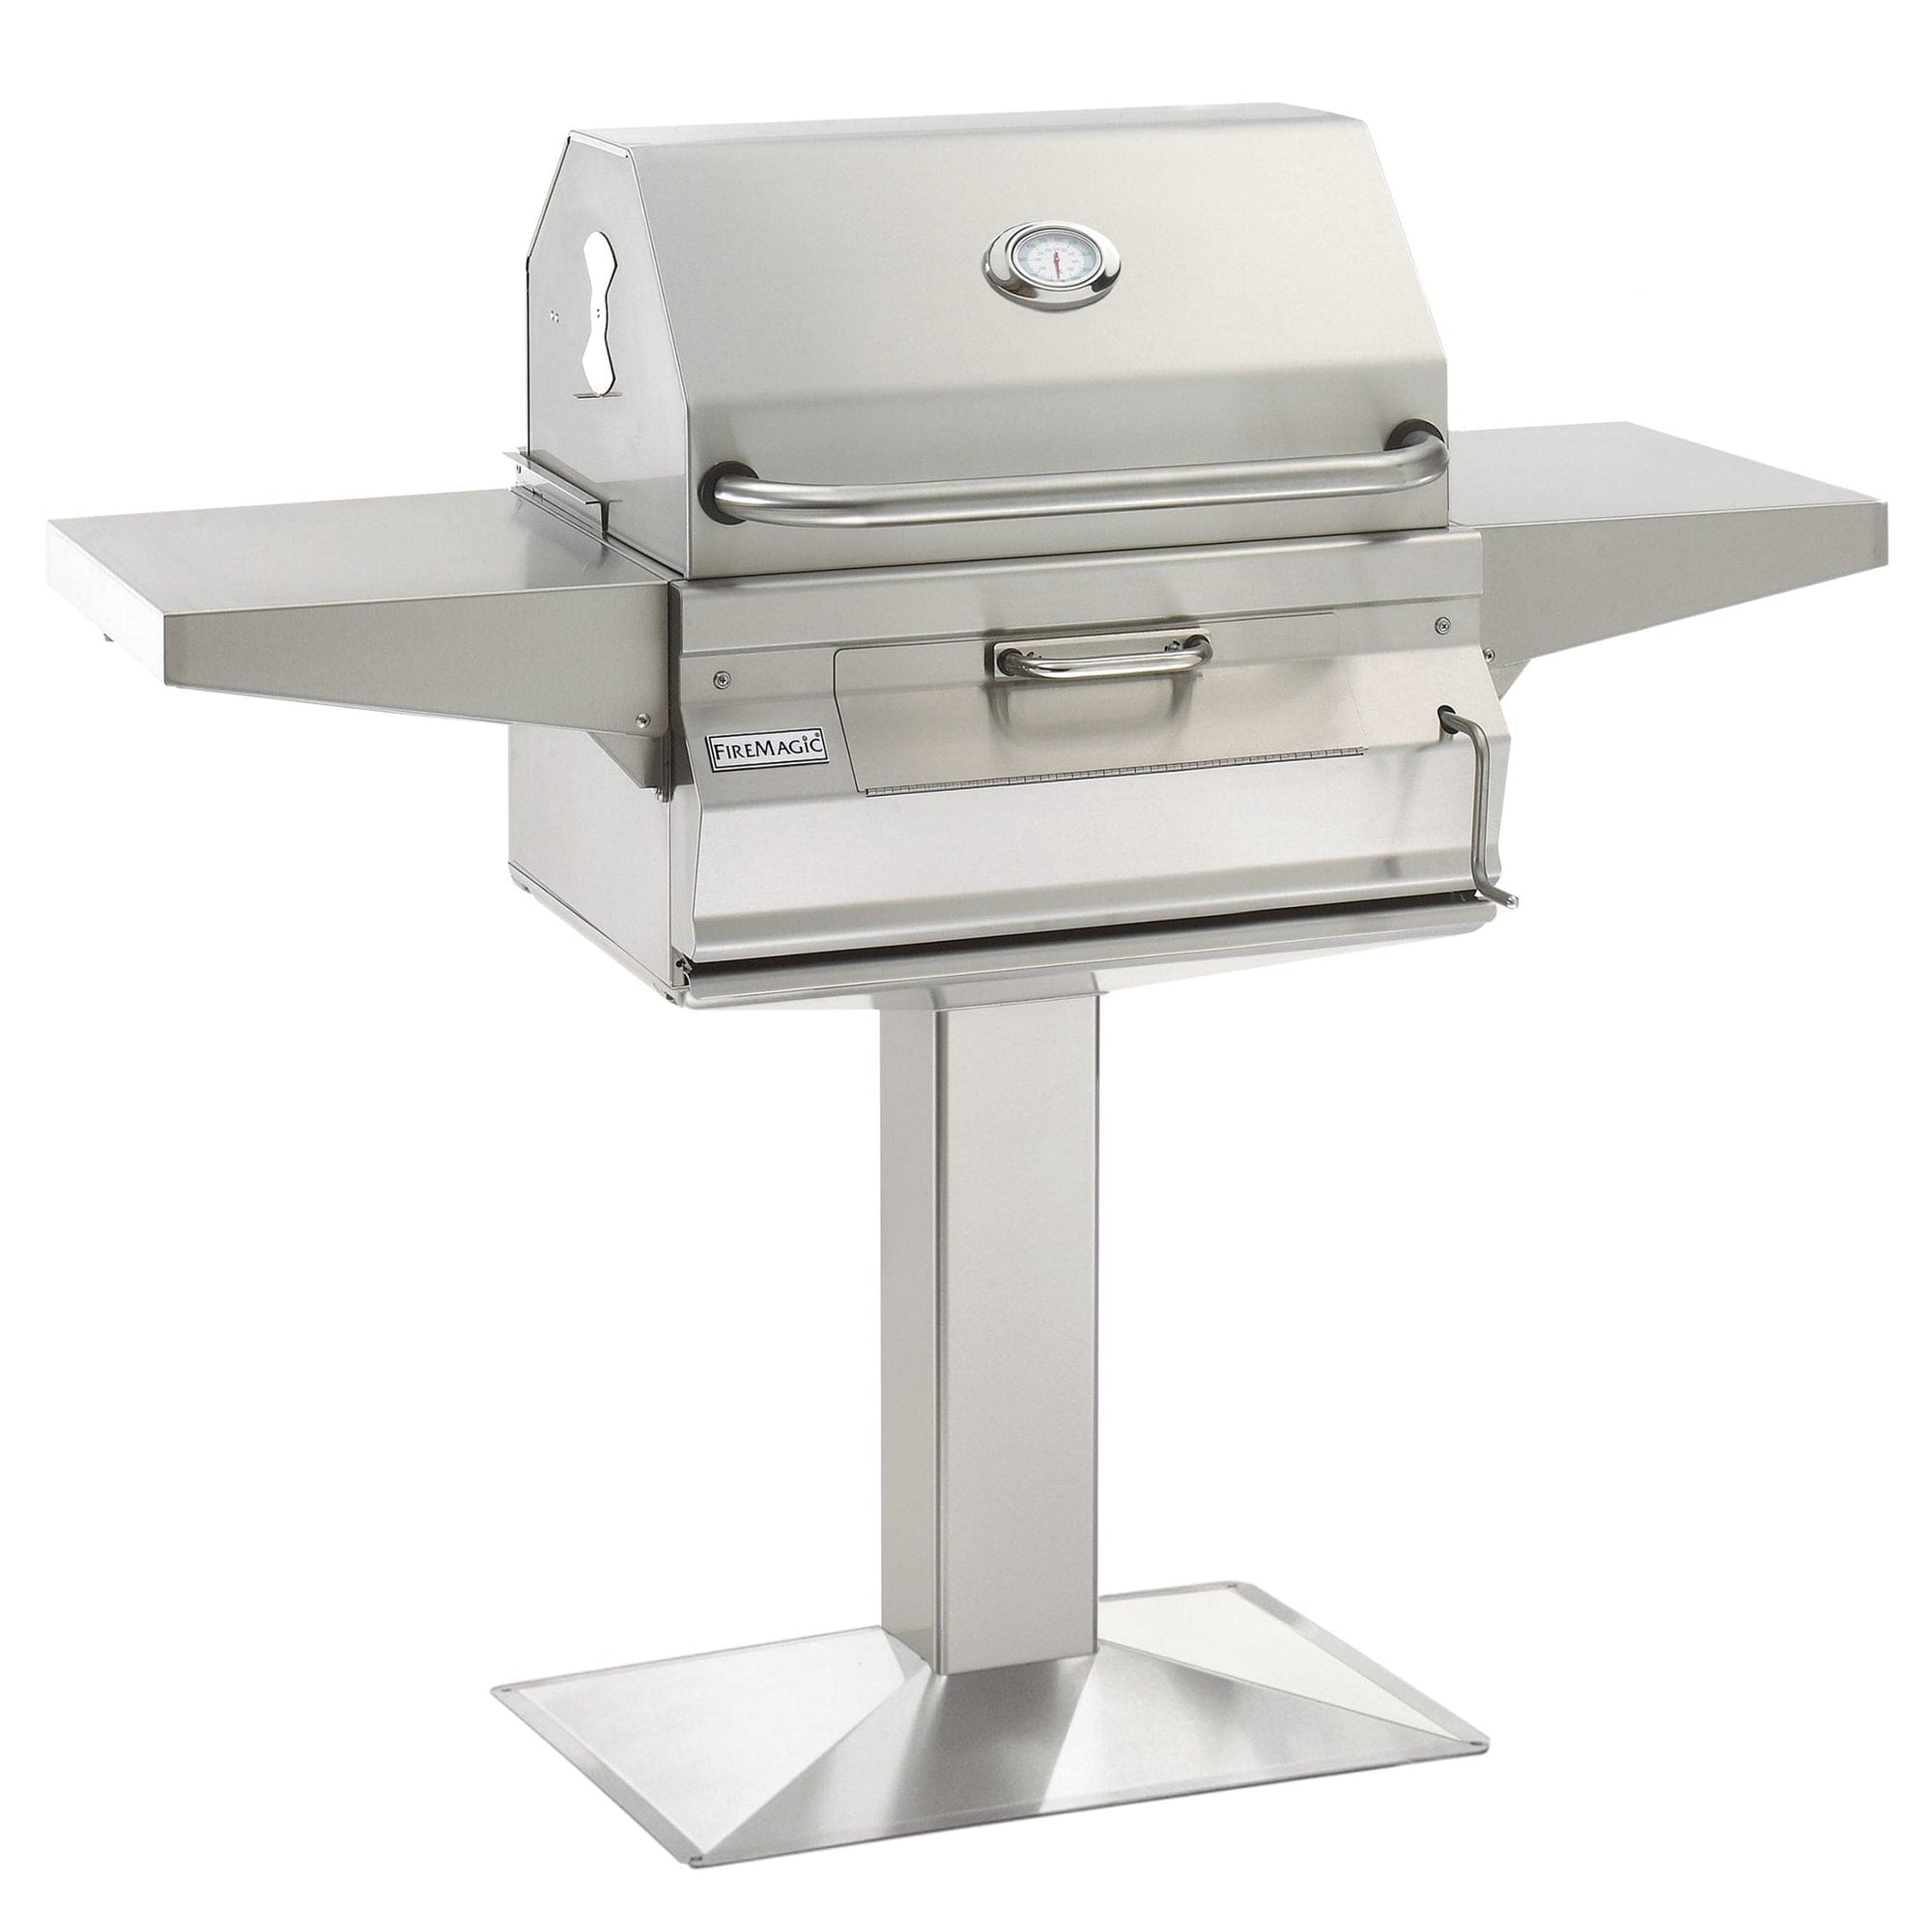 Firemagic Grills Patio Post Mount Fire Magic 24" Post Mount Stainless Steel Charcoal Grills / 22-SC01C-P6, 22-SC01C-G6